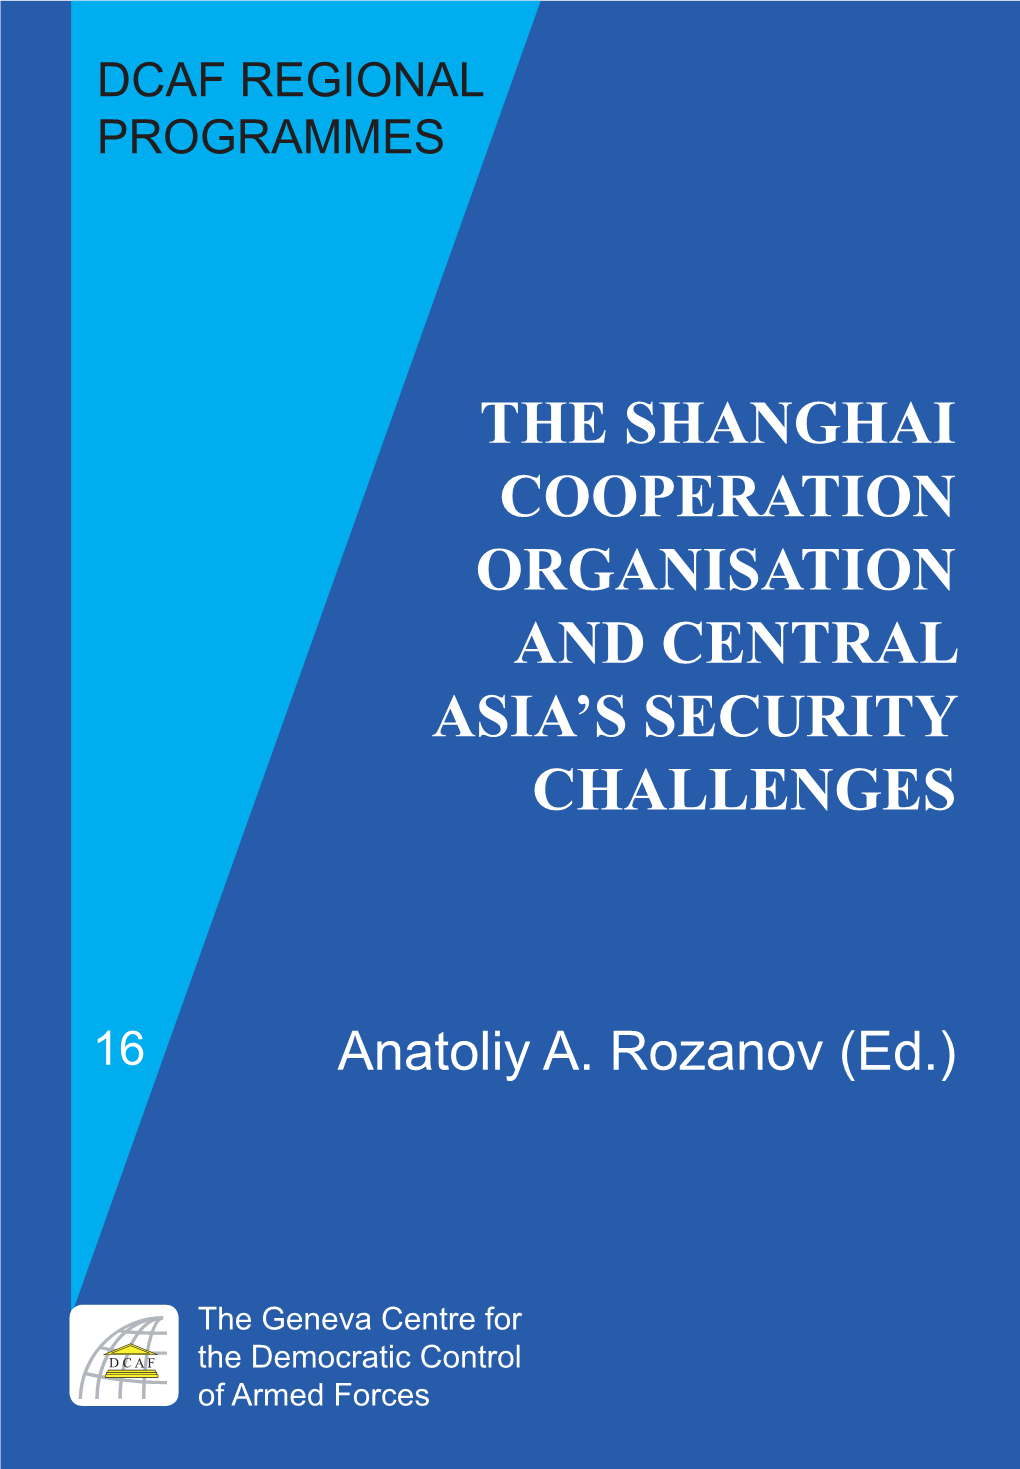 The Shanghai Cooperation Organisation and Central Asia's